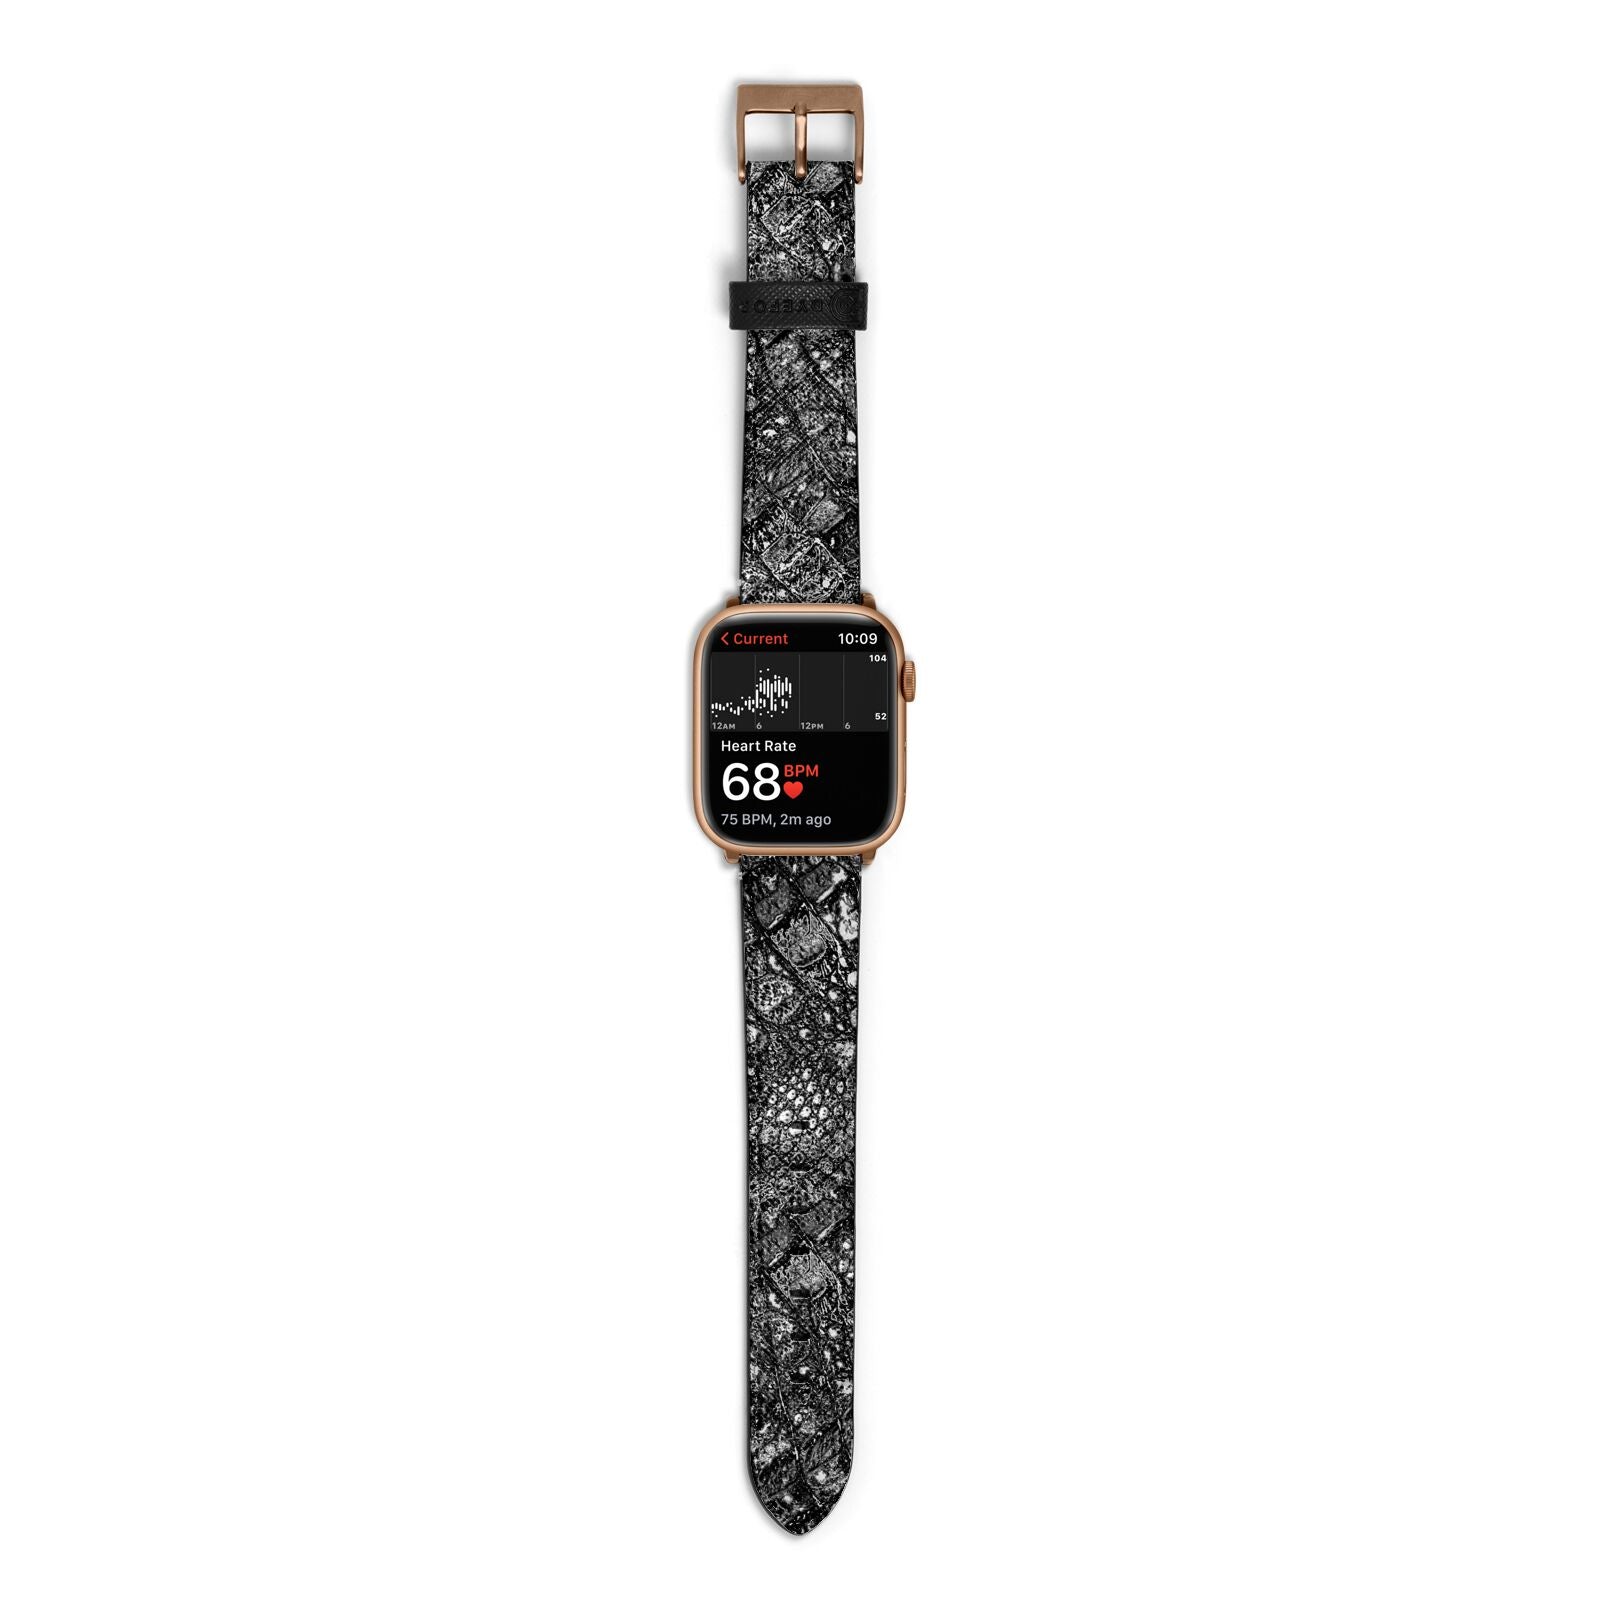 Snakeskin Design Apple Watch Strap Size 38mm with Gold Hardware